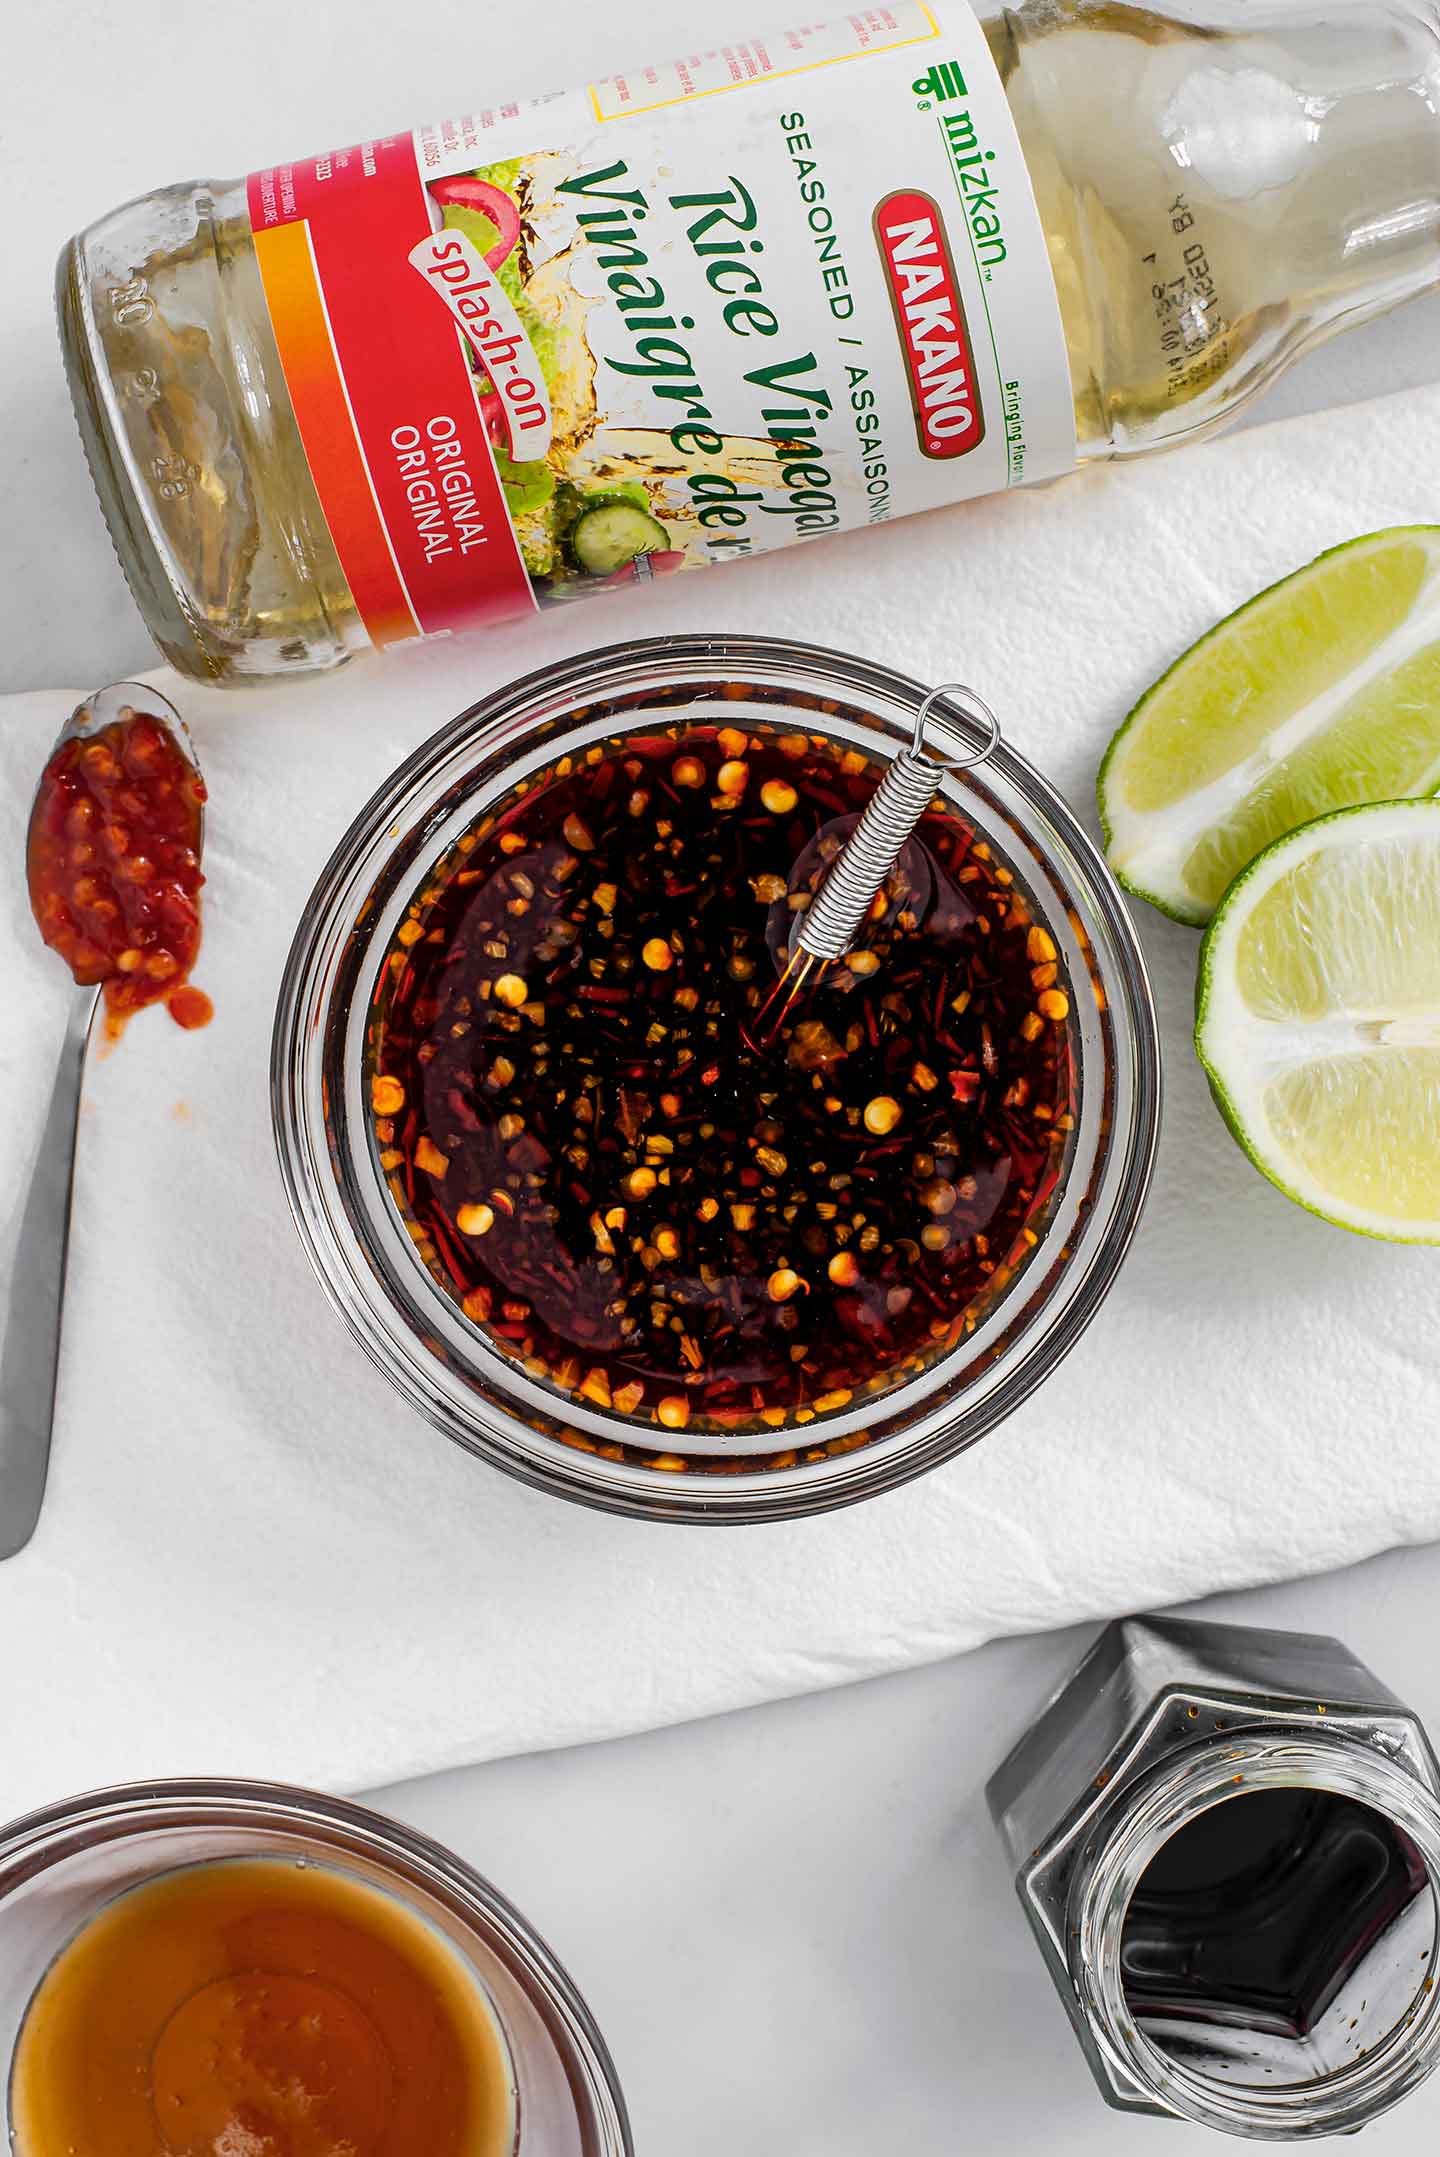 Top down view of pad thai sauce in a small dish with rice vinegar, lime wedges, chilli garlic sauce, tamari, and maple syrup scattered around.